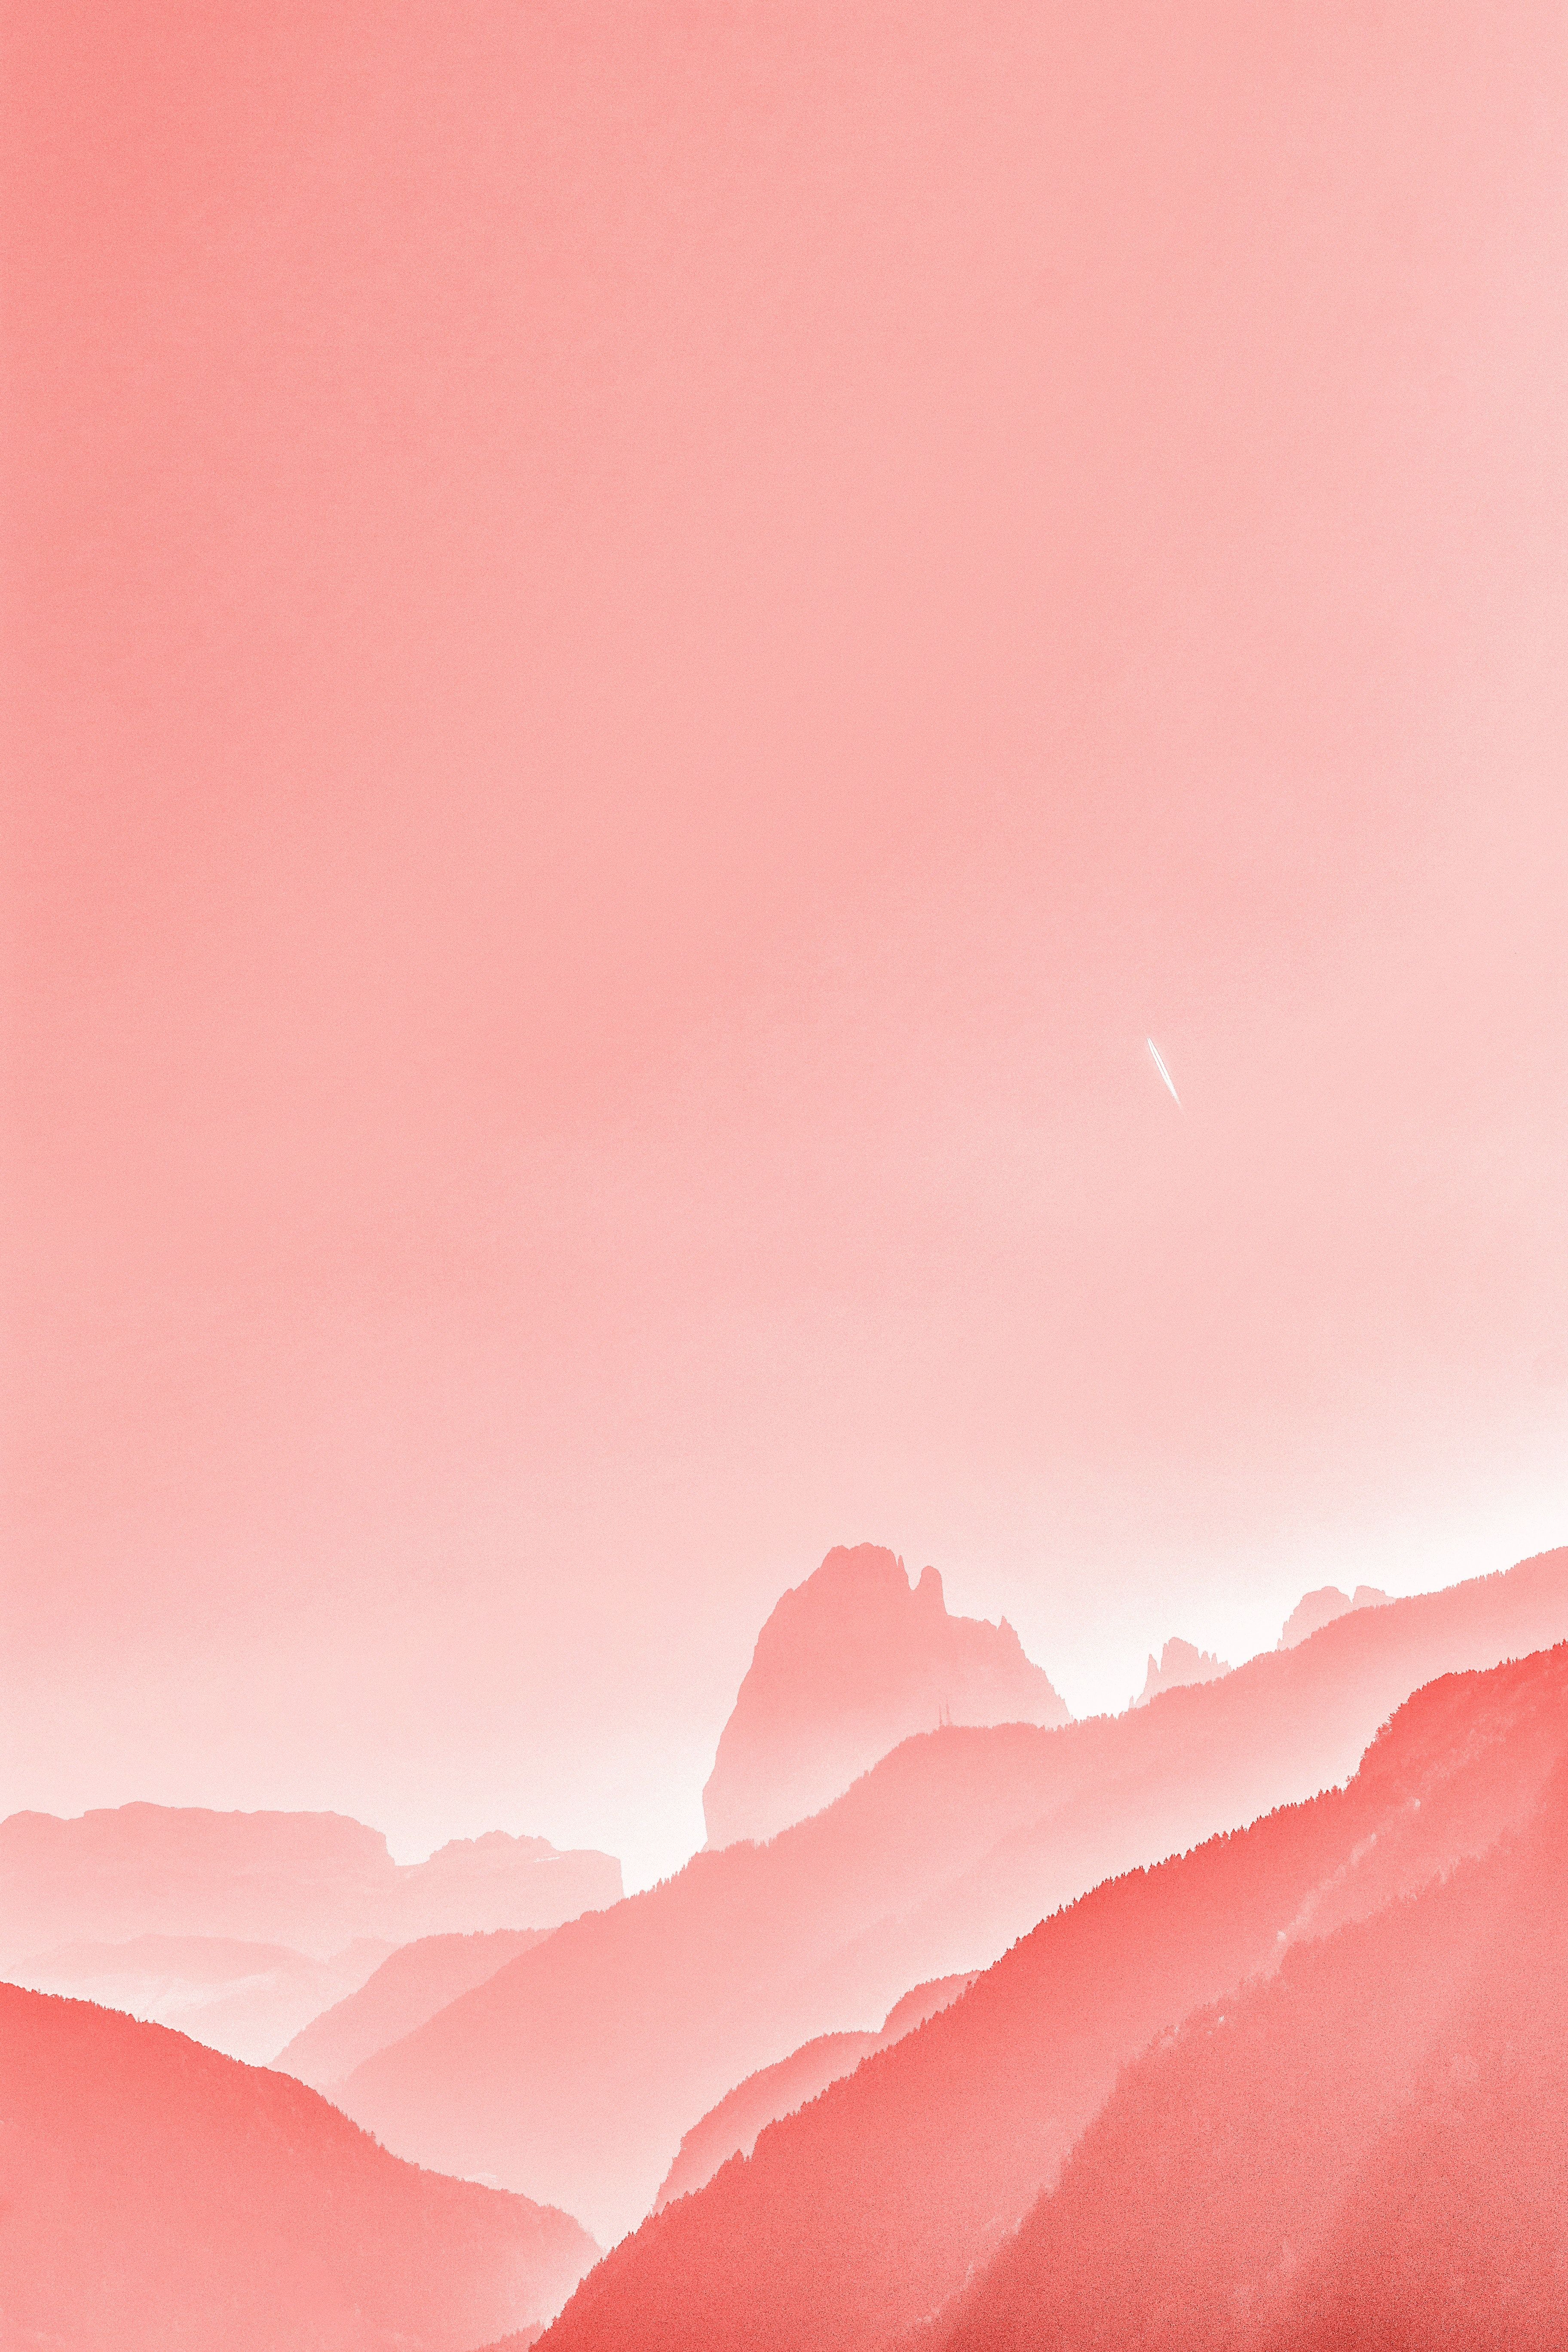 A pink sky with mountains in the background - Pastel